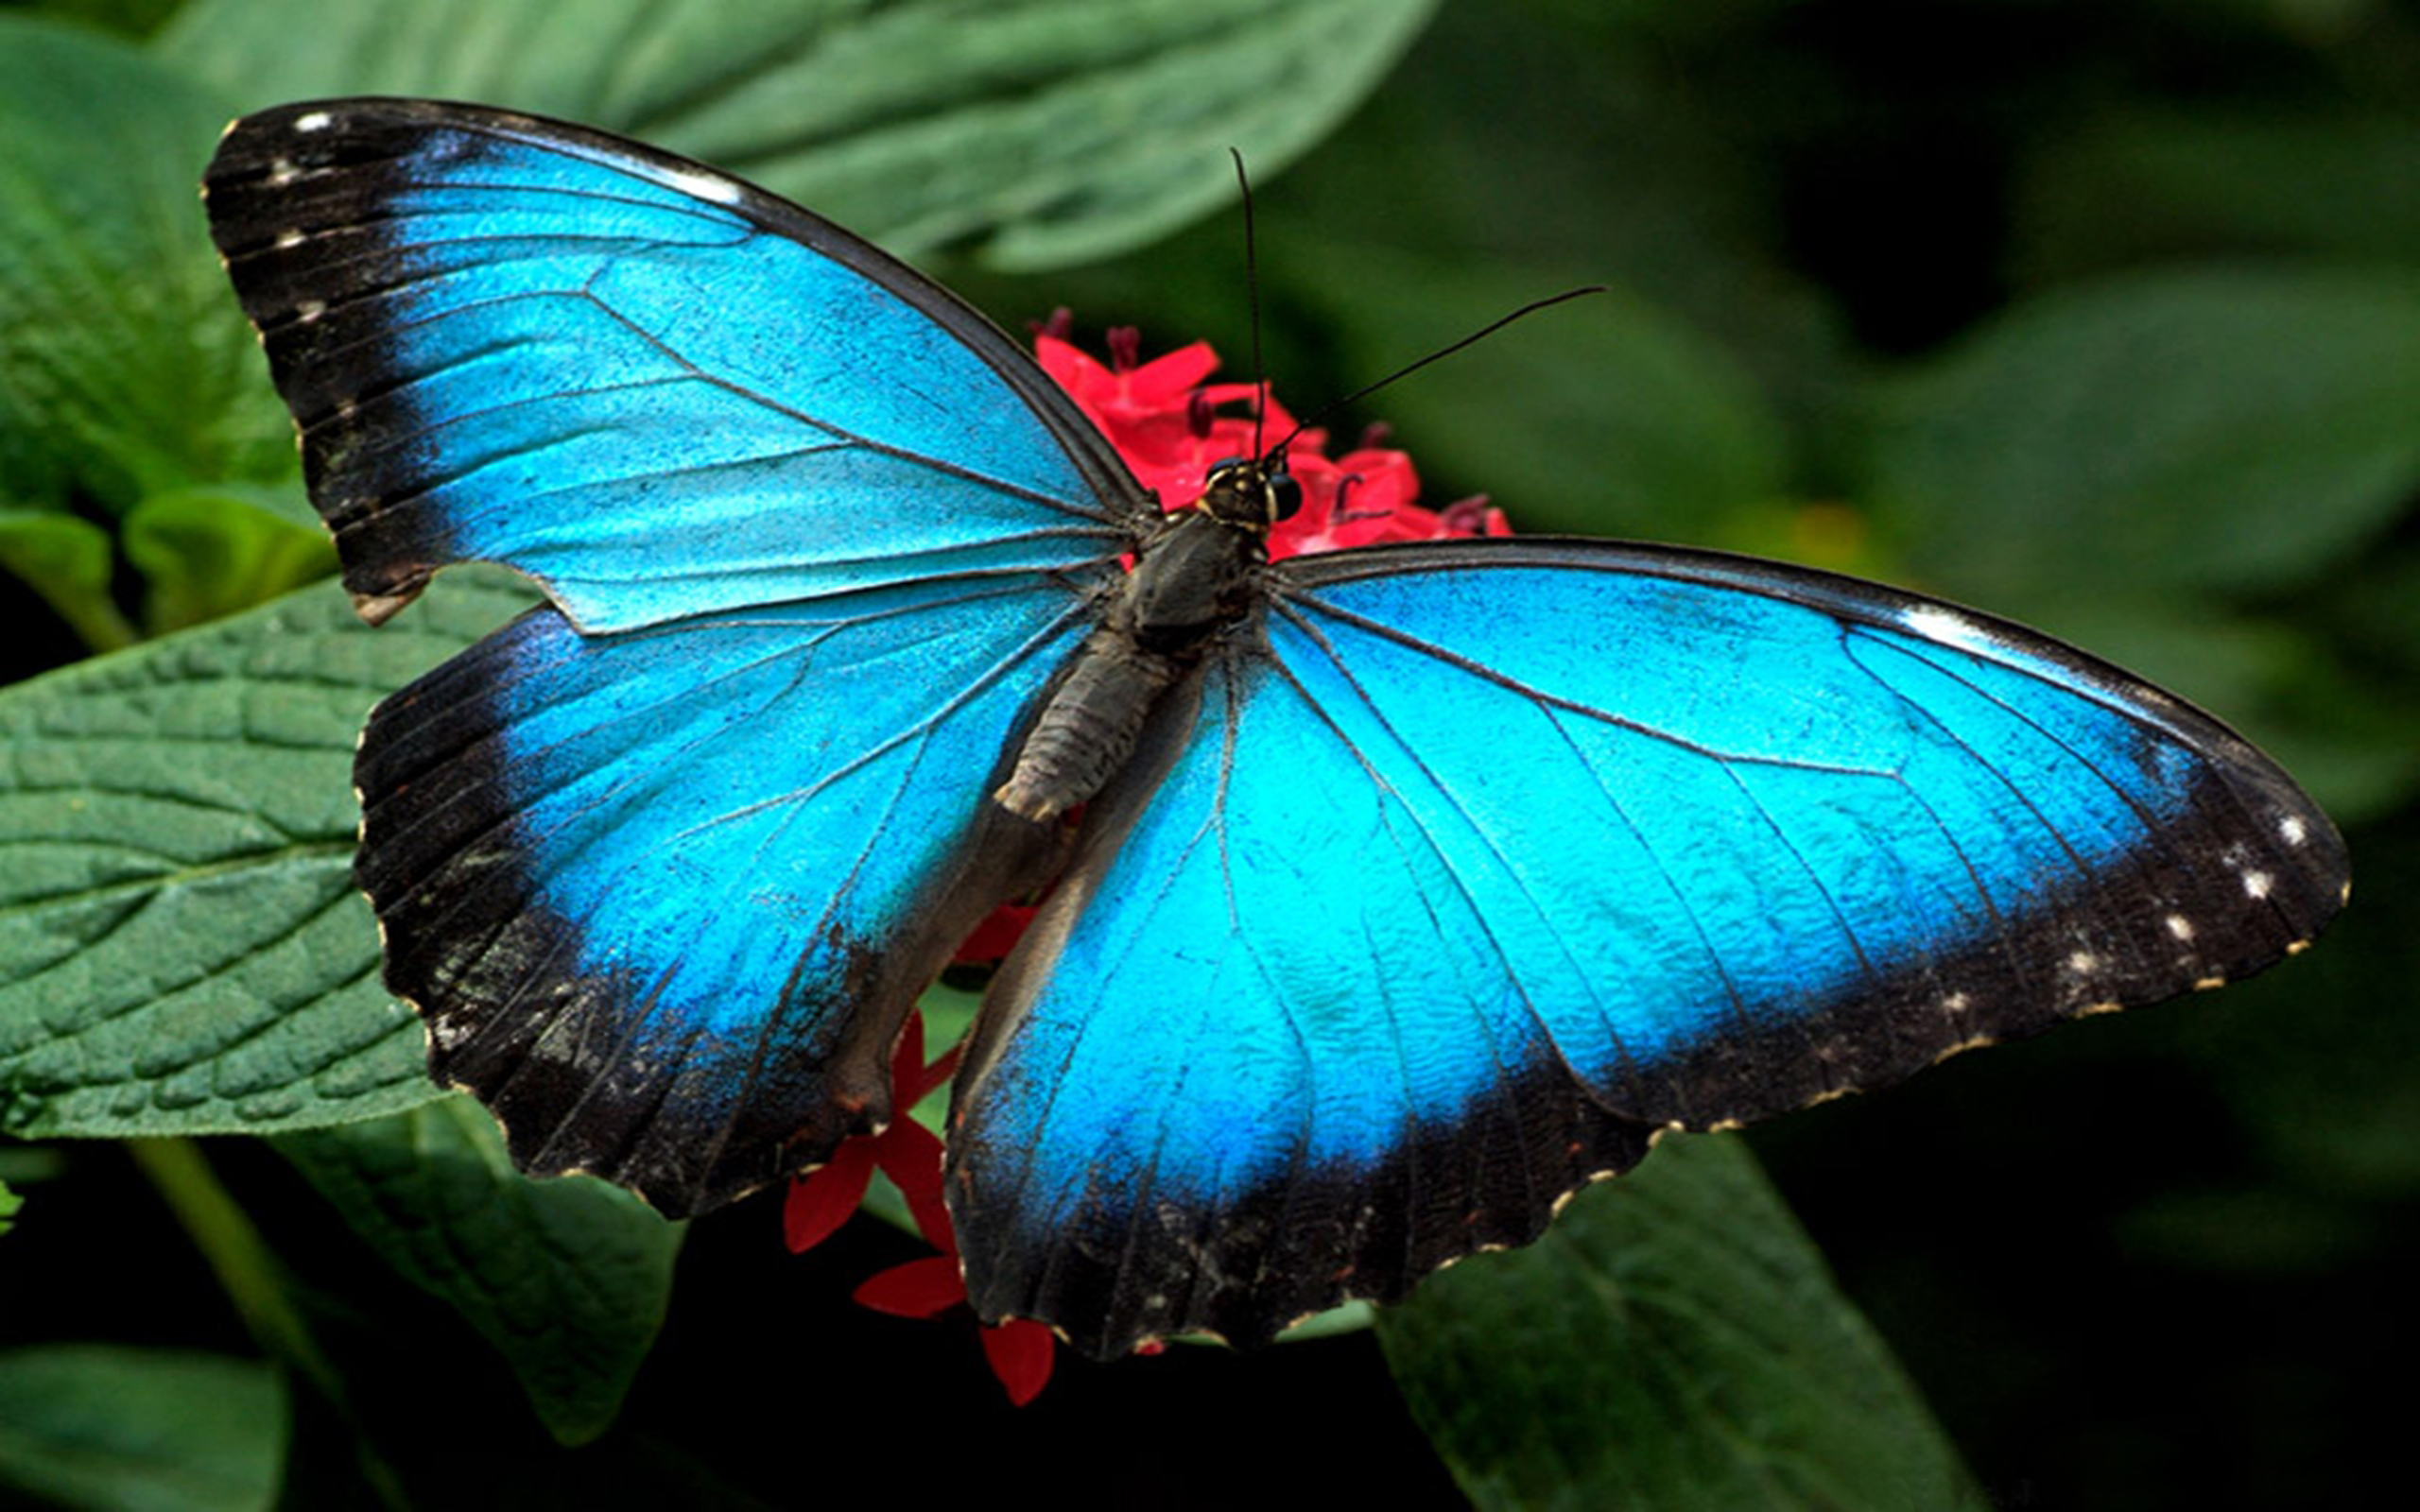 Blue Butterfly Images Hd Wallpaper - Reverasite